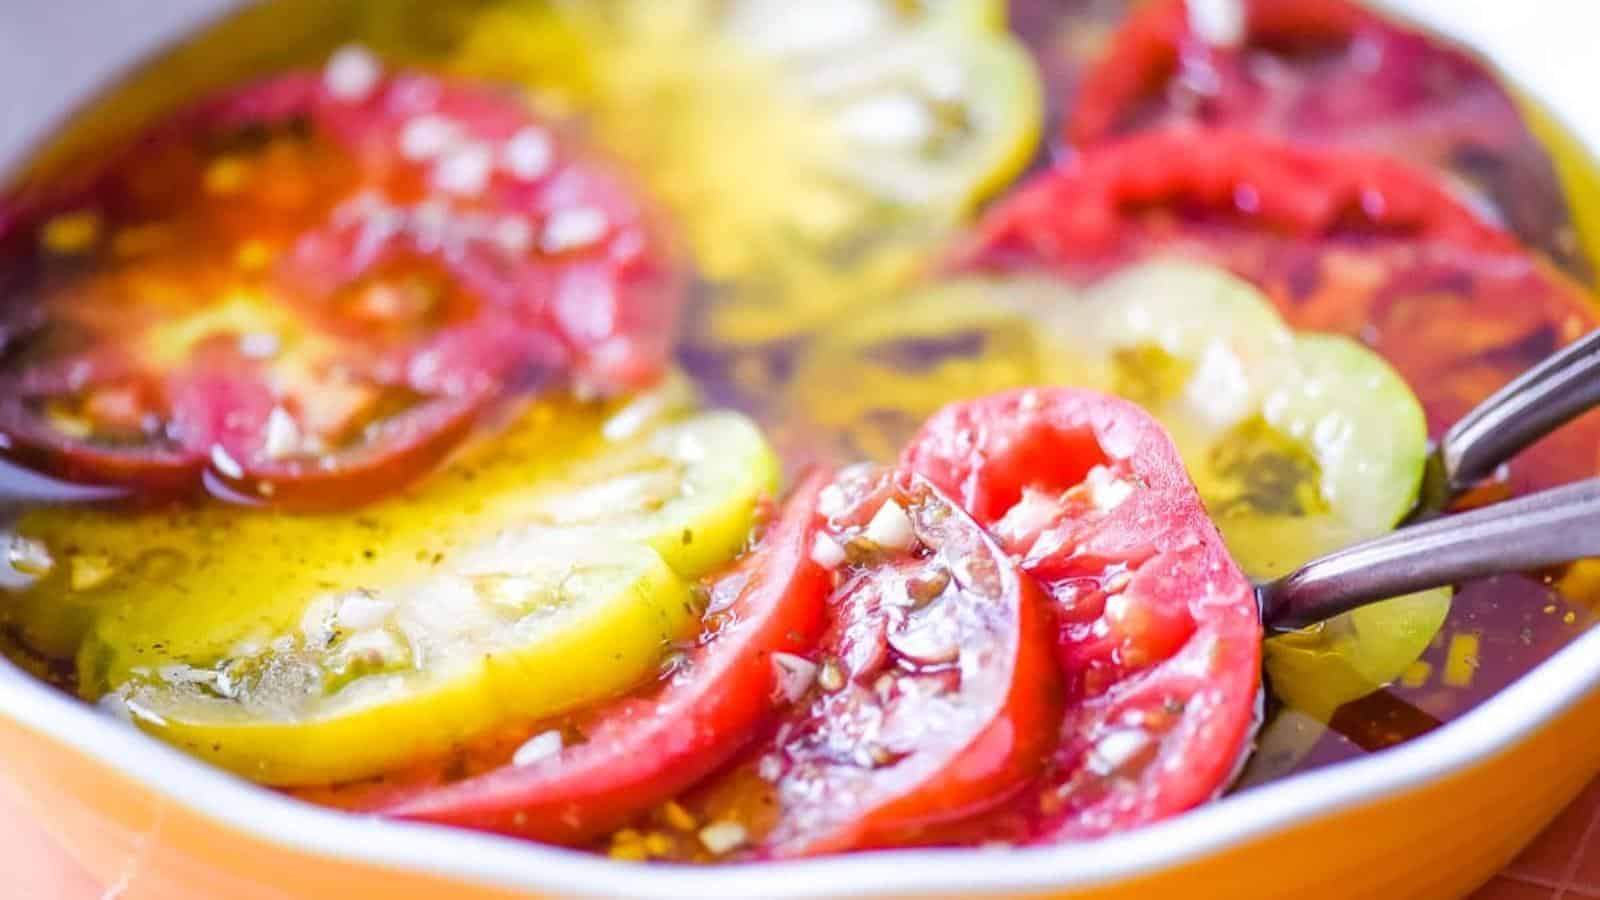 Closeup of marinated heirloom tomatoes in a yellow and white pie dish.